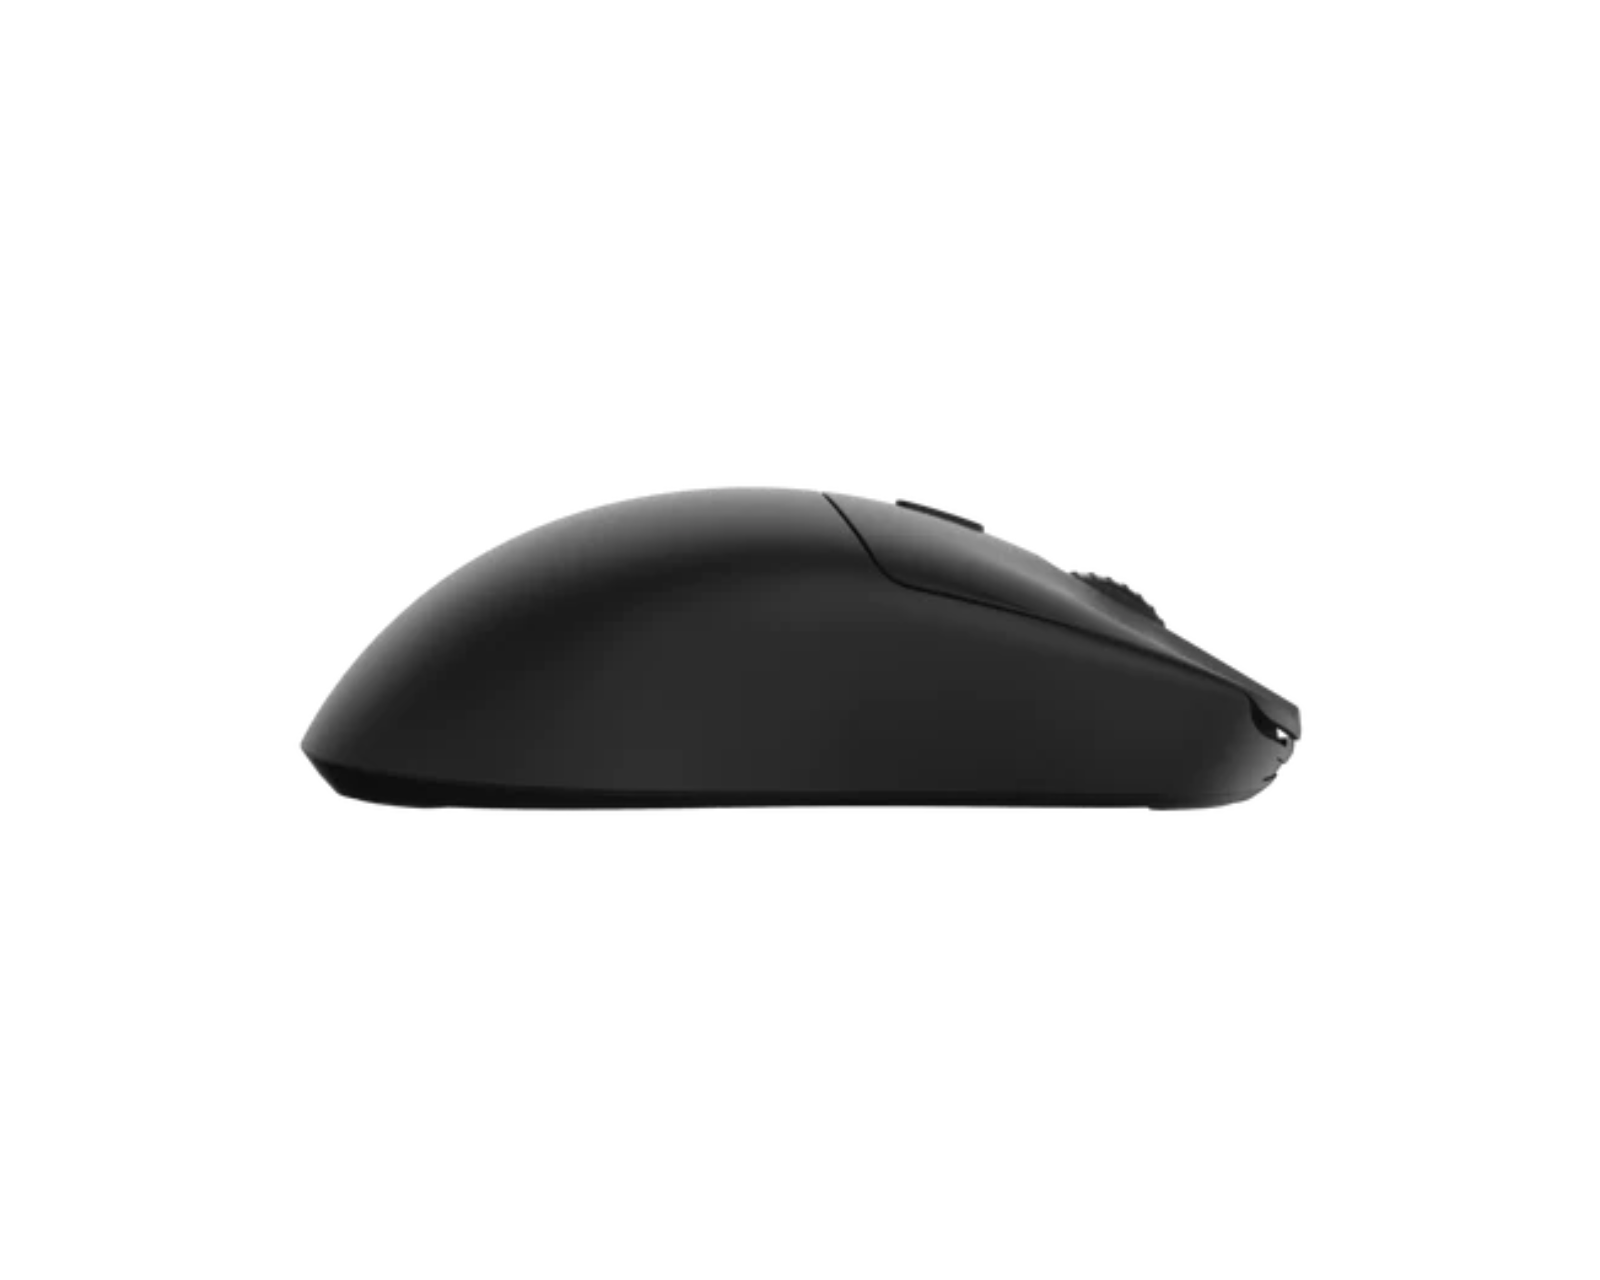 G-Wolves HTX 4K Wireless Gaming Mouse - Black